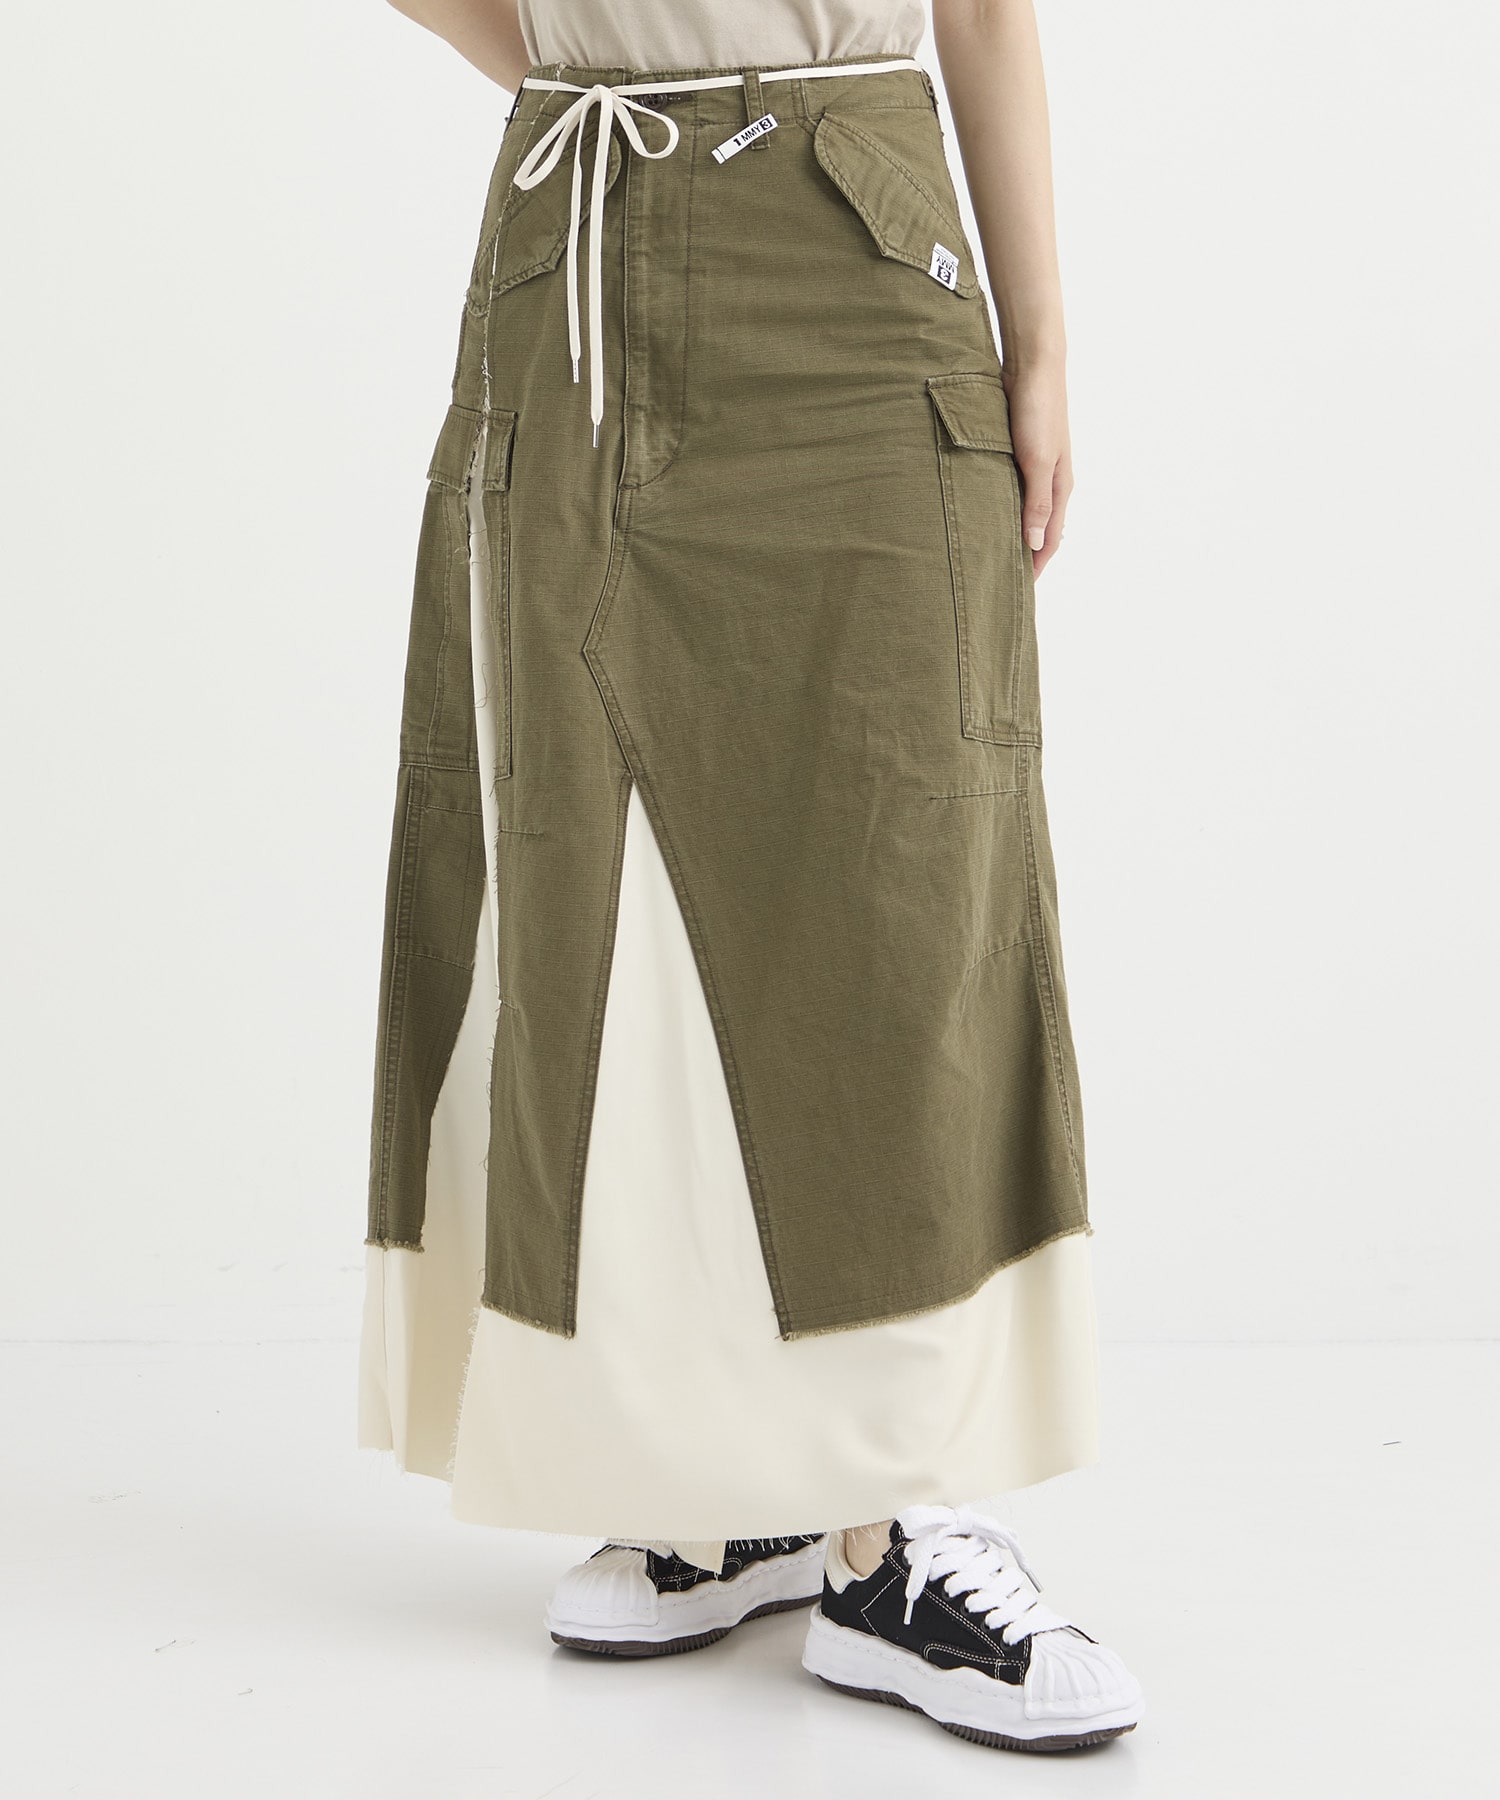 MILLITARY PANTS COMBINED SKIRT